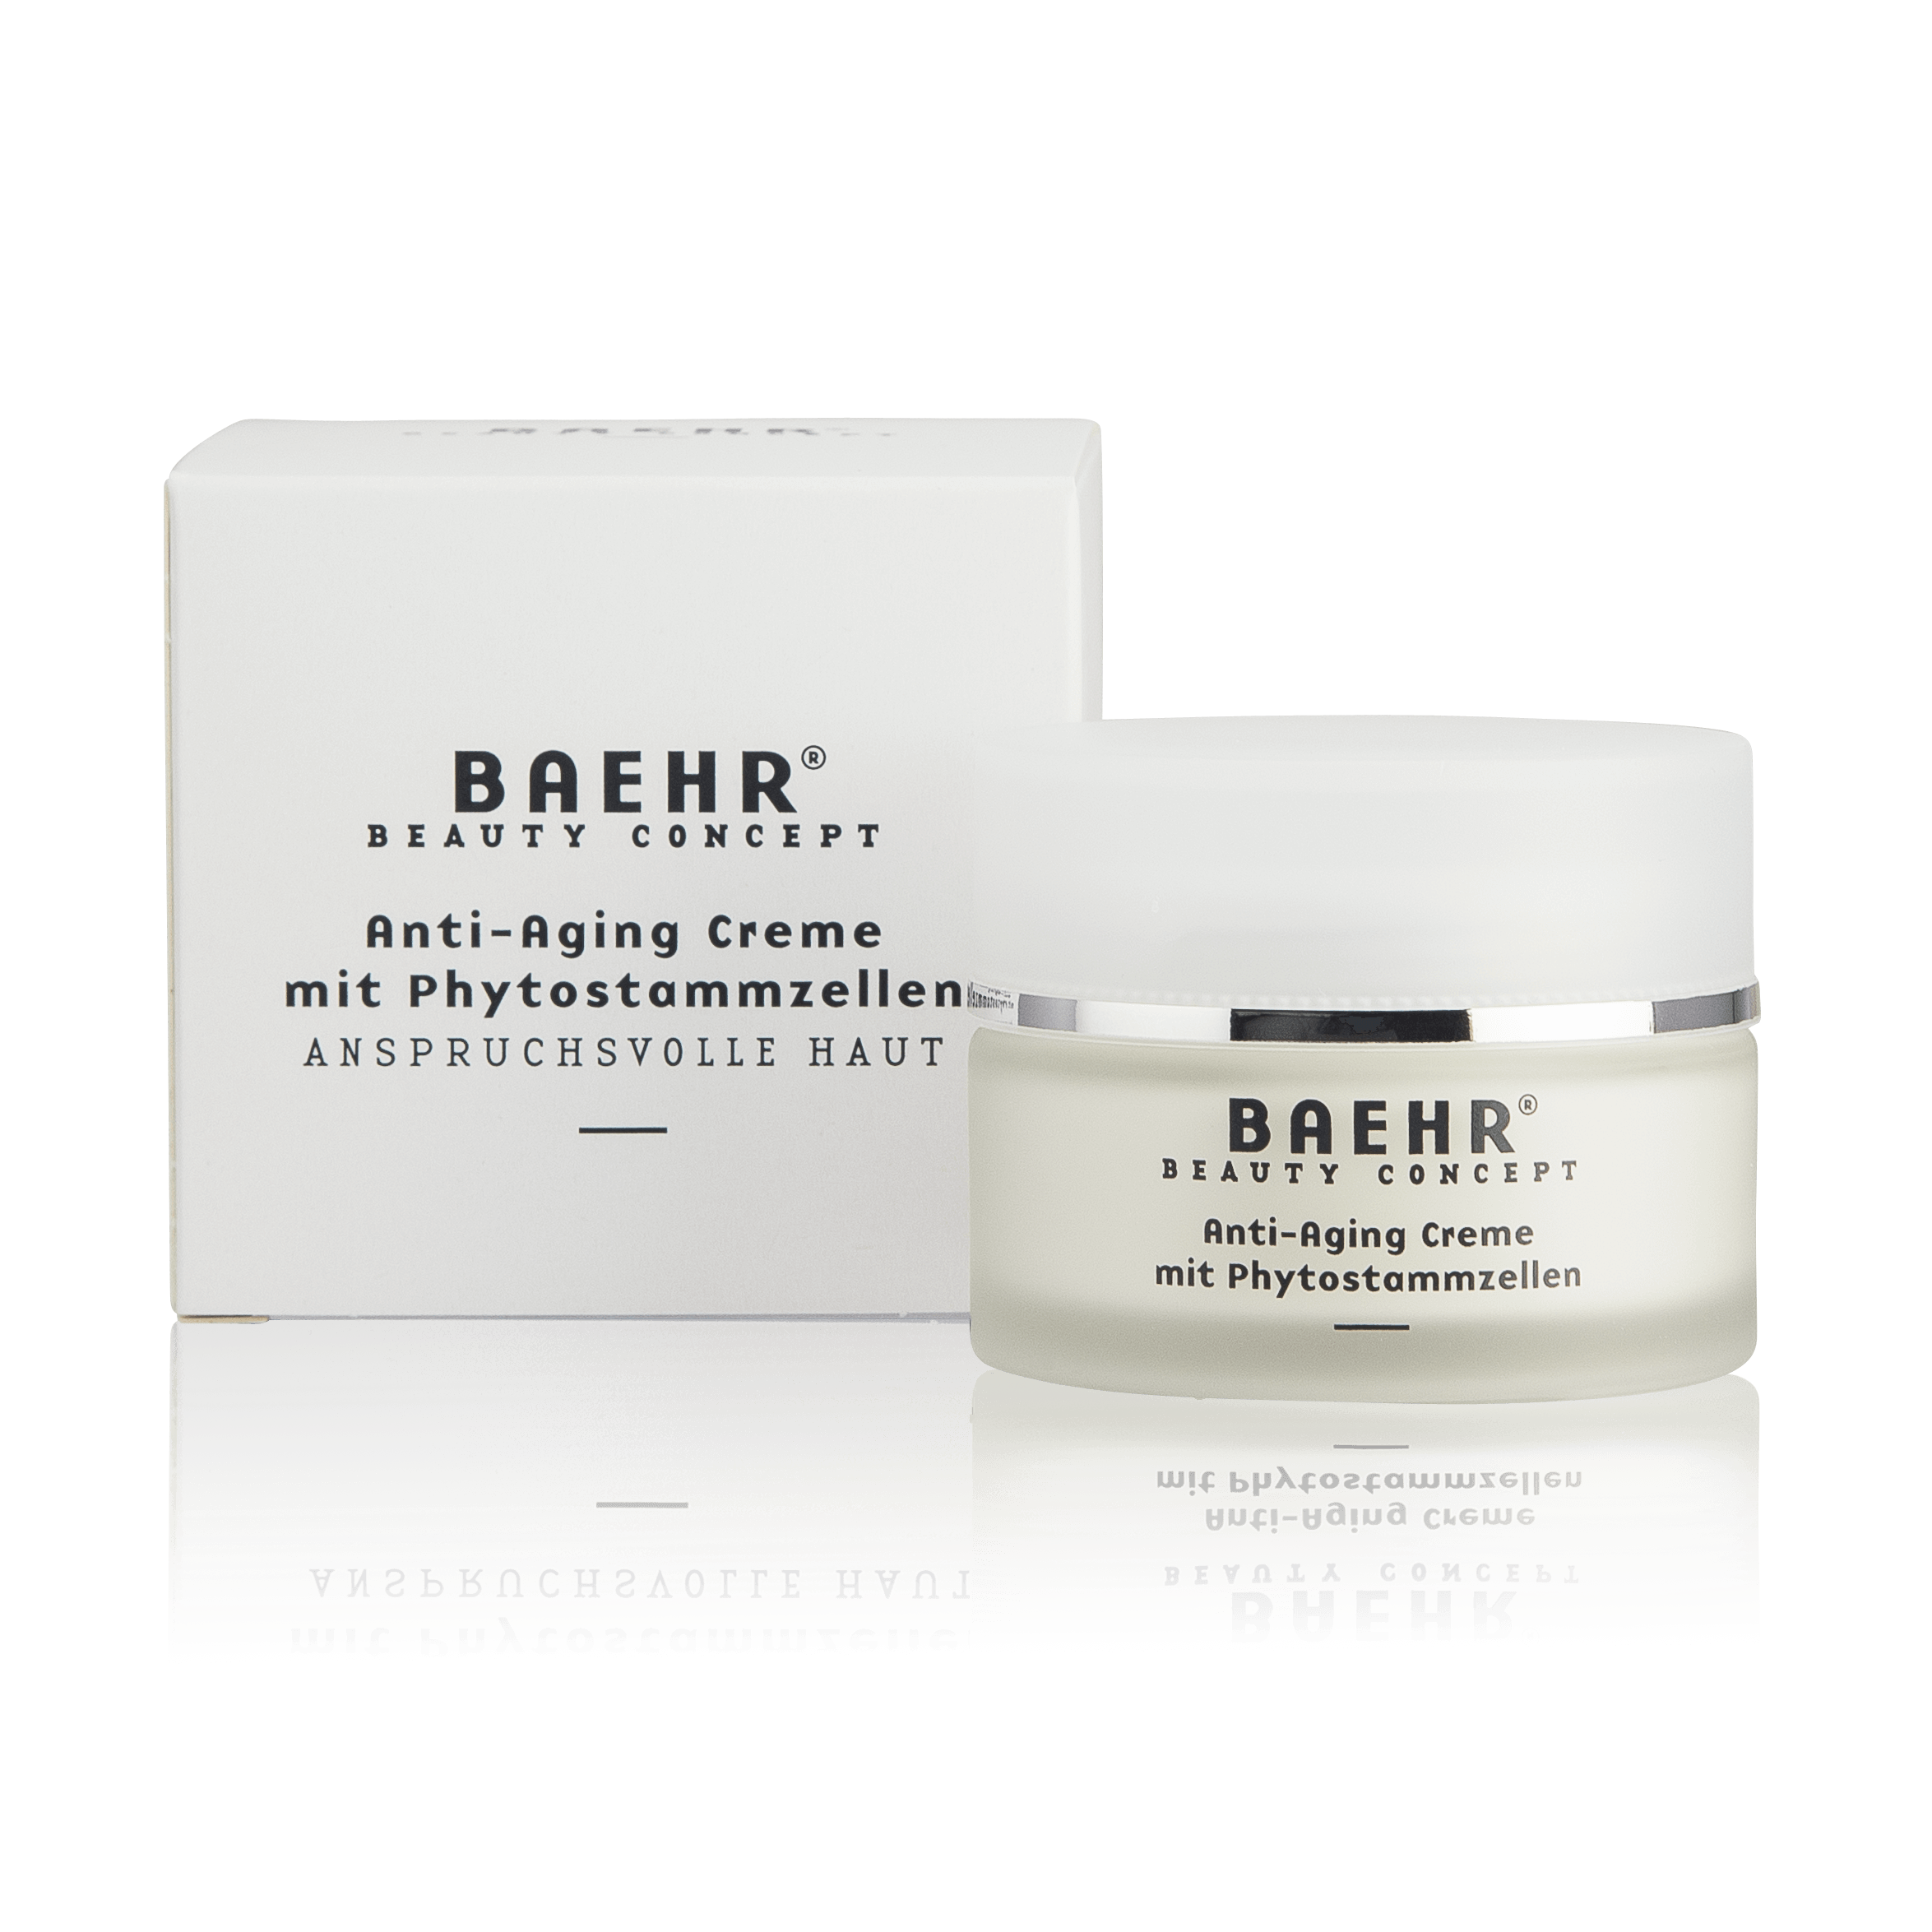 BAEHR BEAUTY CONCEPT Anti-Aging Creme 50 ml